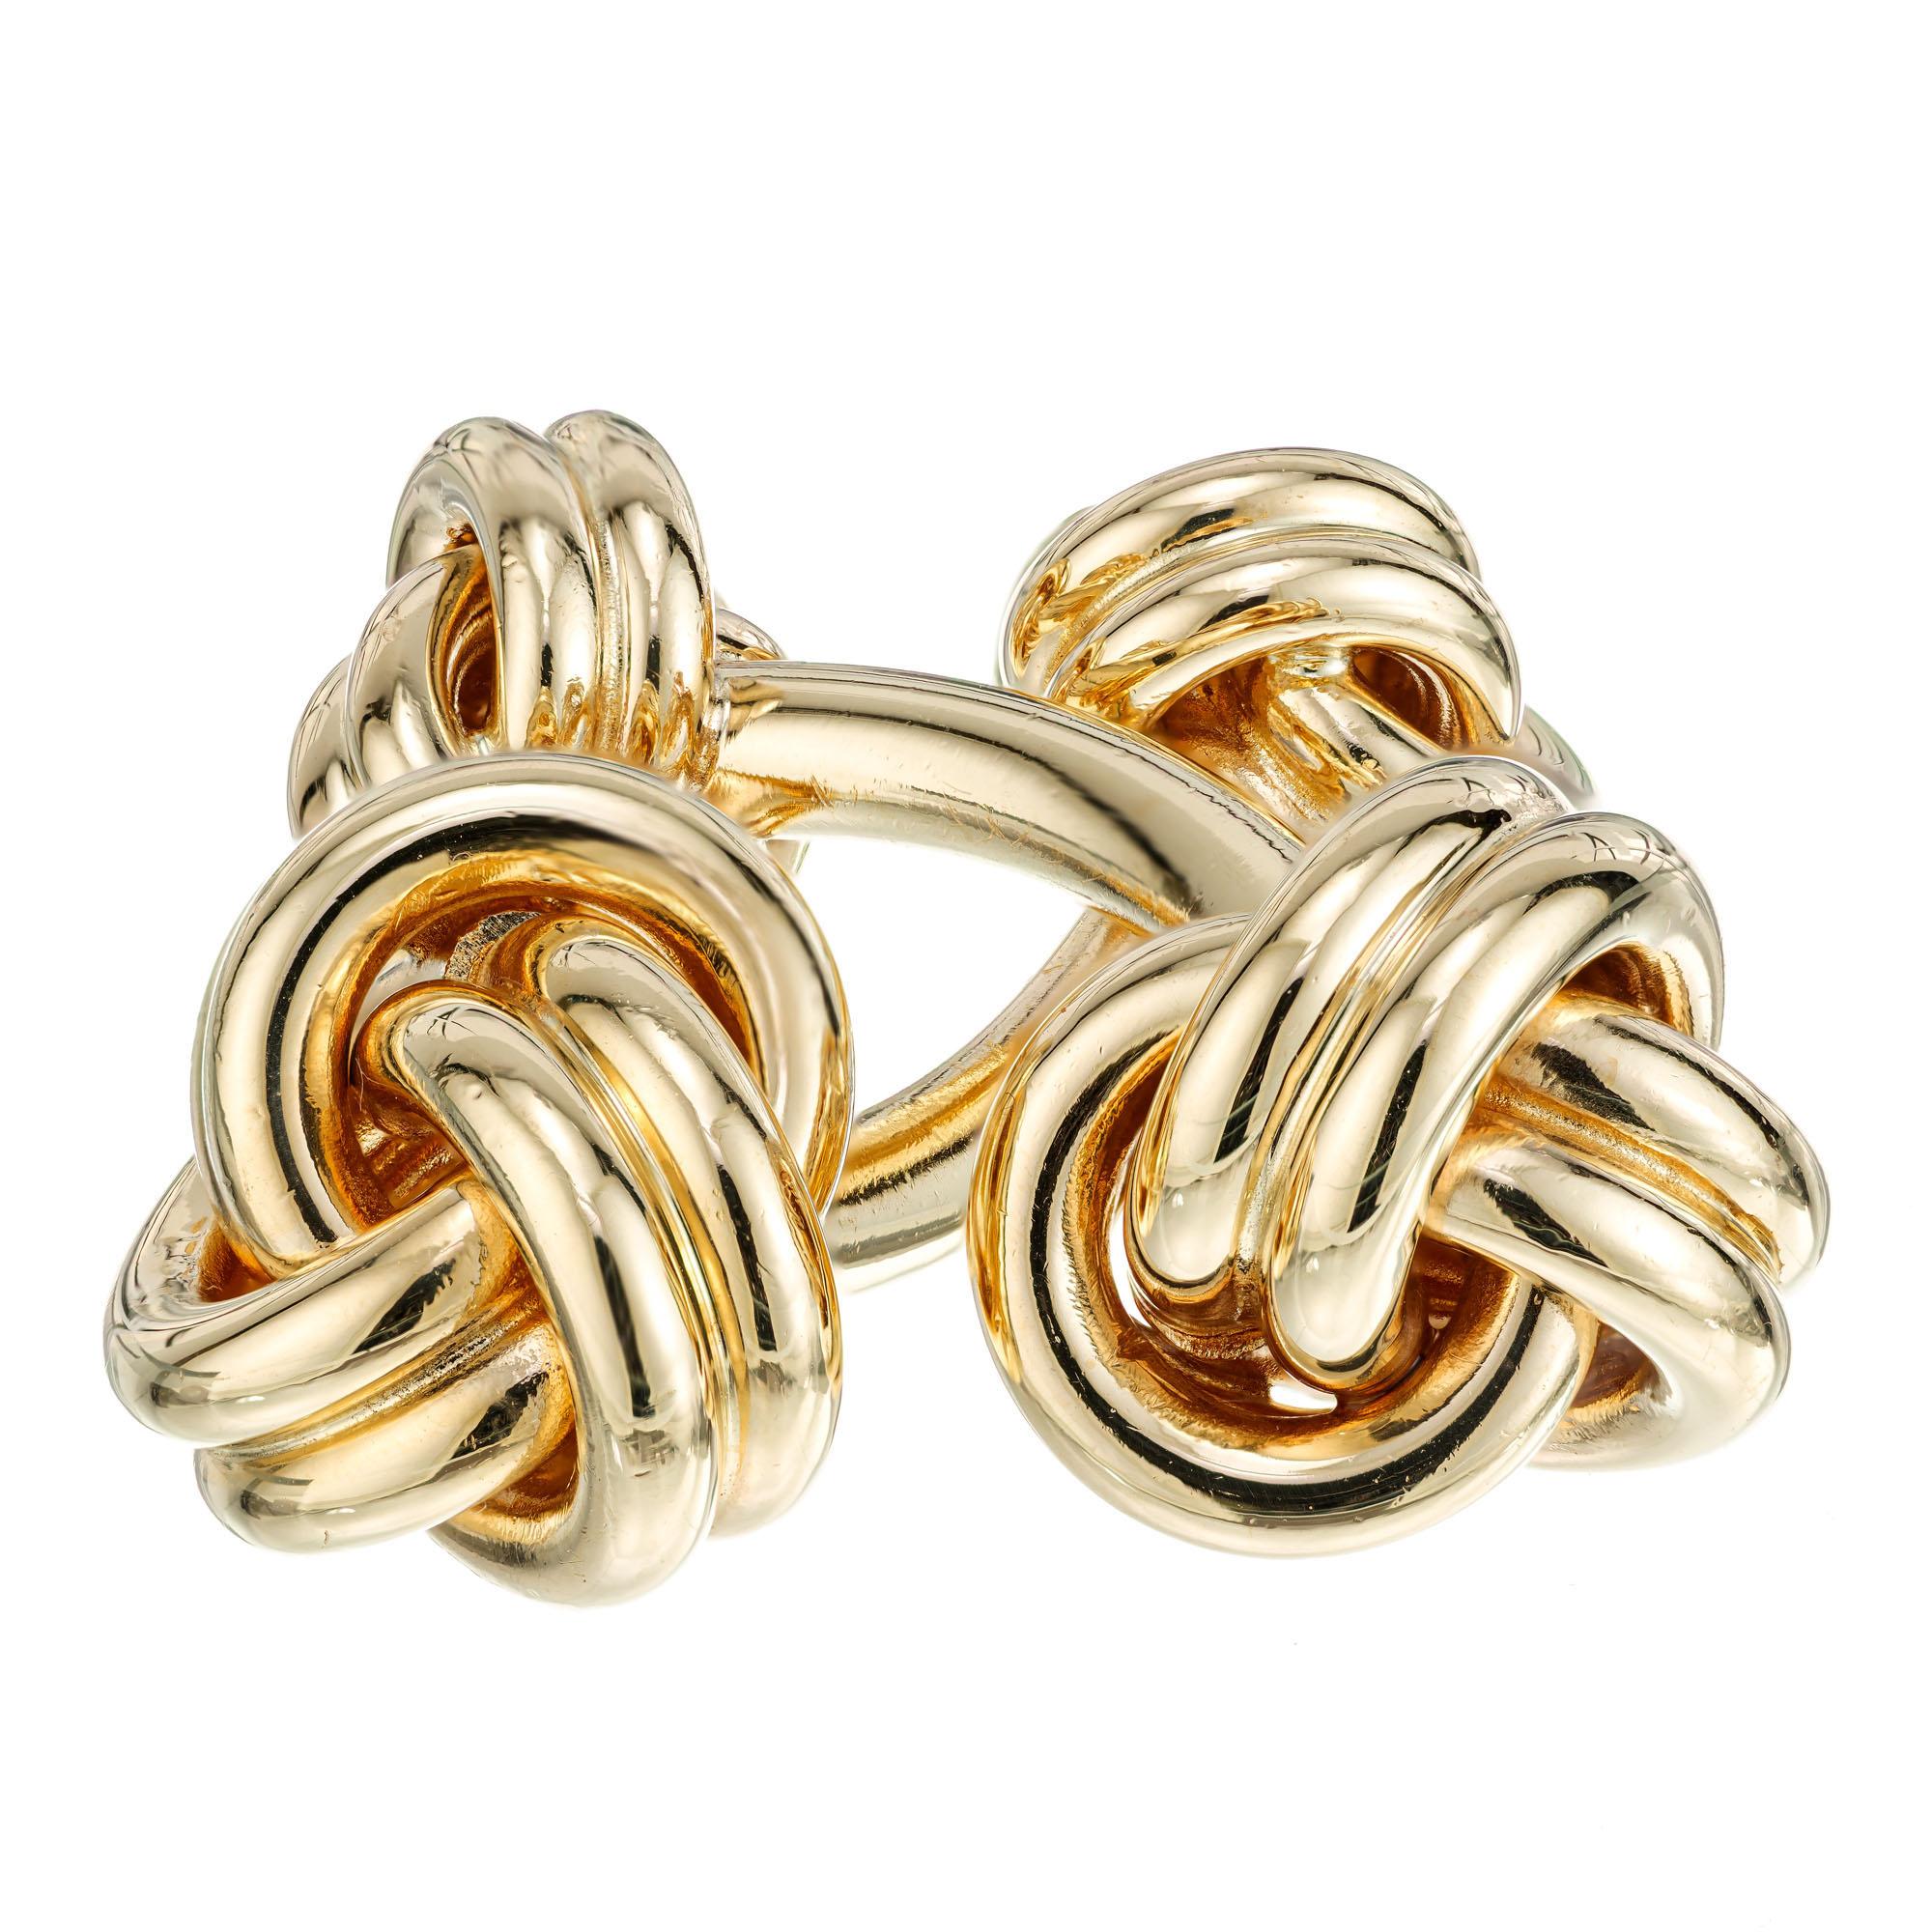 Tiffany & Co solid heavy double sided knot cufflinks. 14k yellow gold. Circa 1960's

14k yellow gold 
Stamped: 14k
Hallmark: Tiffany & Co 
21.3 grams
Top to bottom: 29.5mm or 1.1 Inch
Width: 10.2mm or .40 Inch
Width: 13.0mm or .50 Inch
Depth or